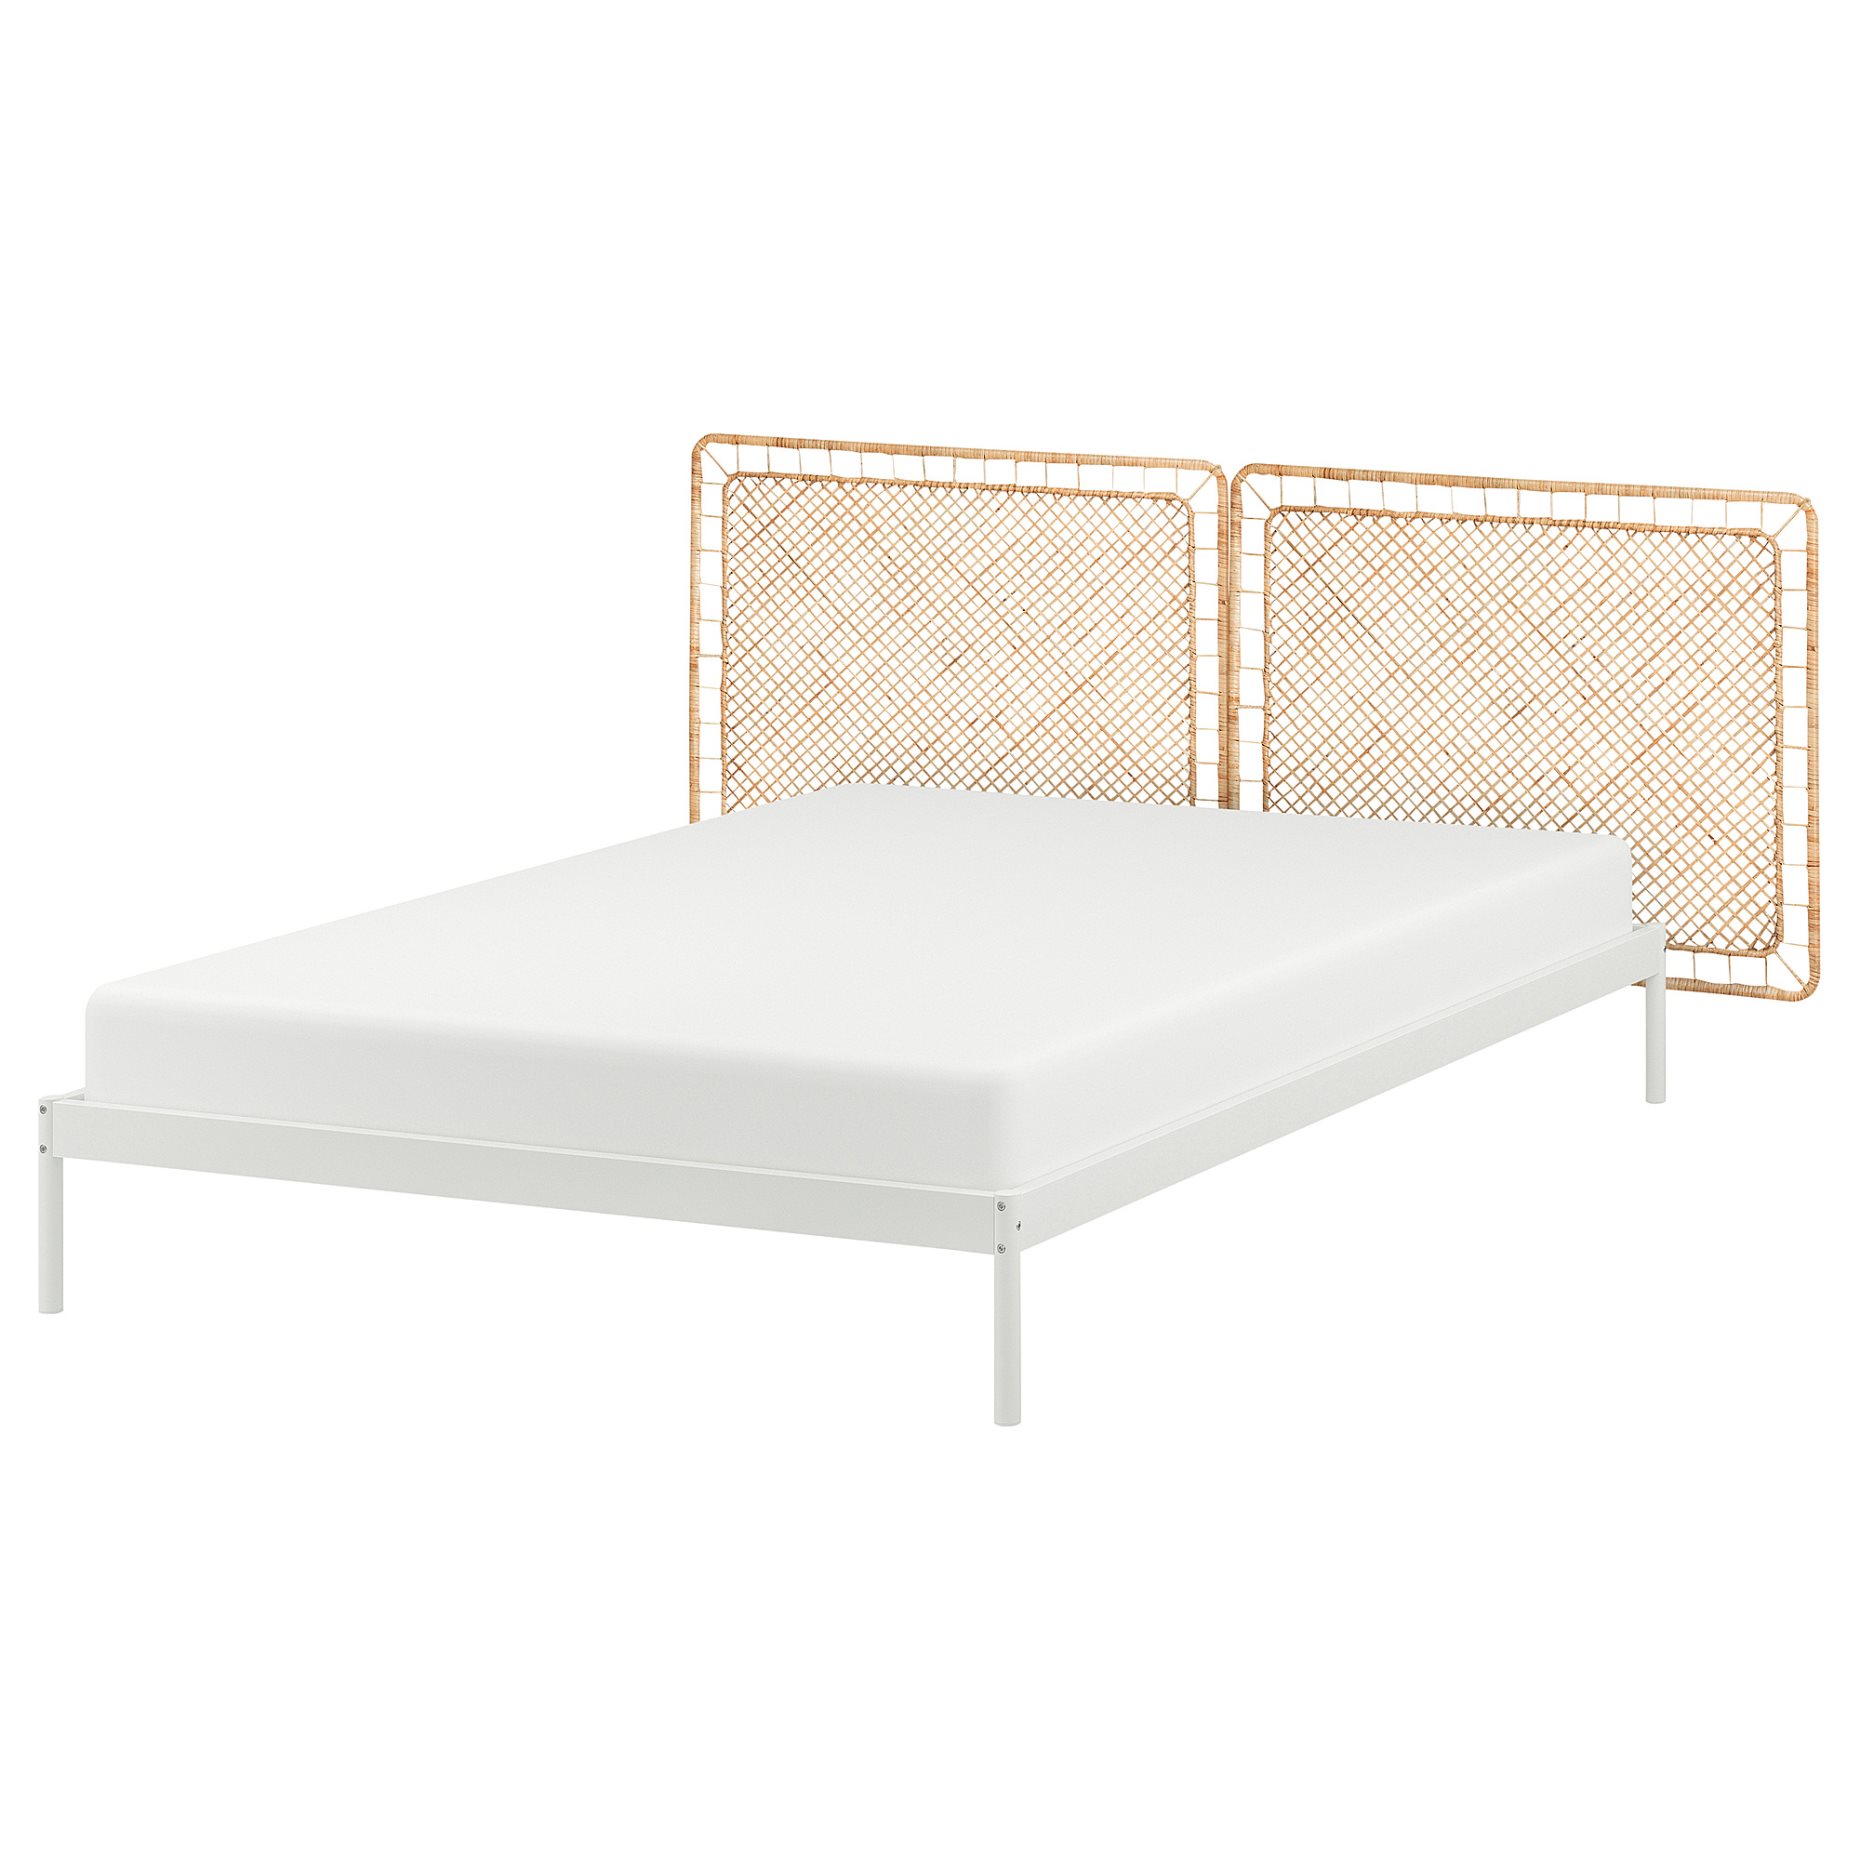 VEVELSTAD, bed frame with 2 headboards, 140x200 cm, 194.417.39